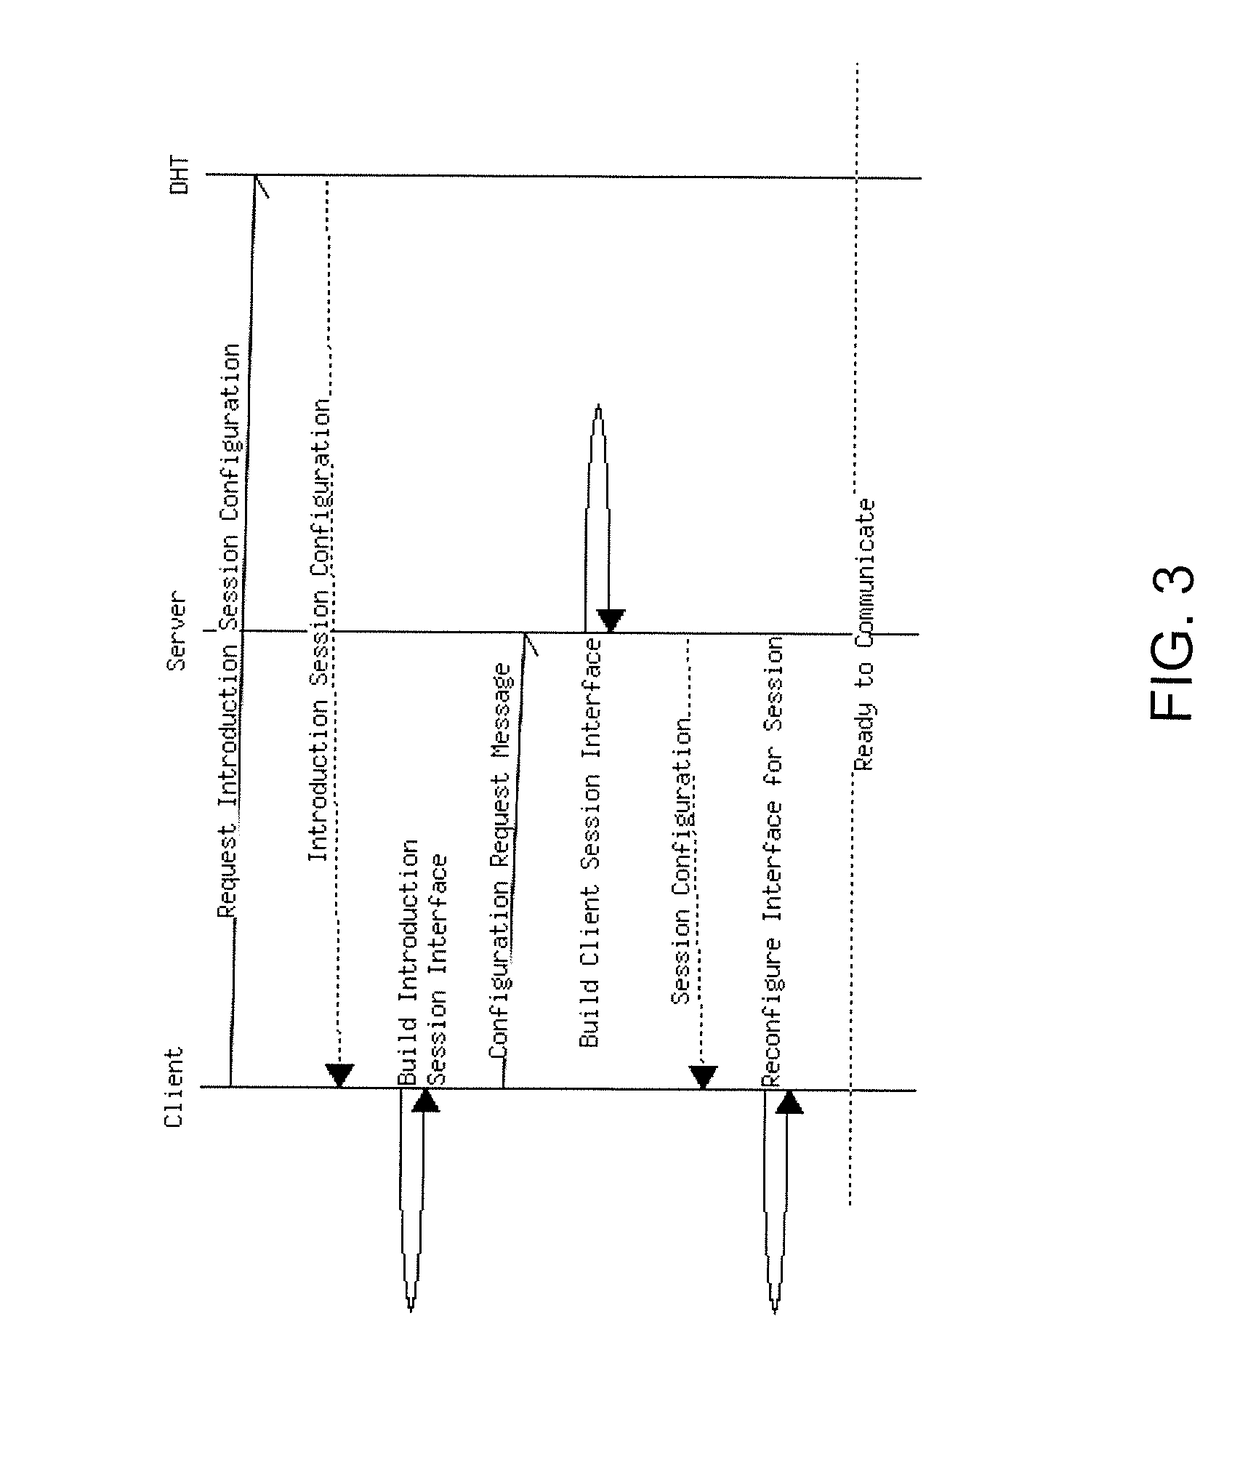 Process and system for establishing a moving target connection for secure communications in client/server systems